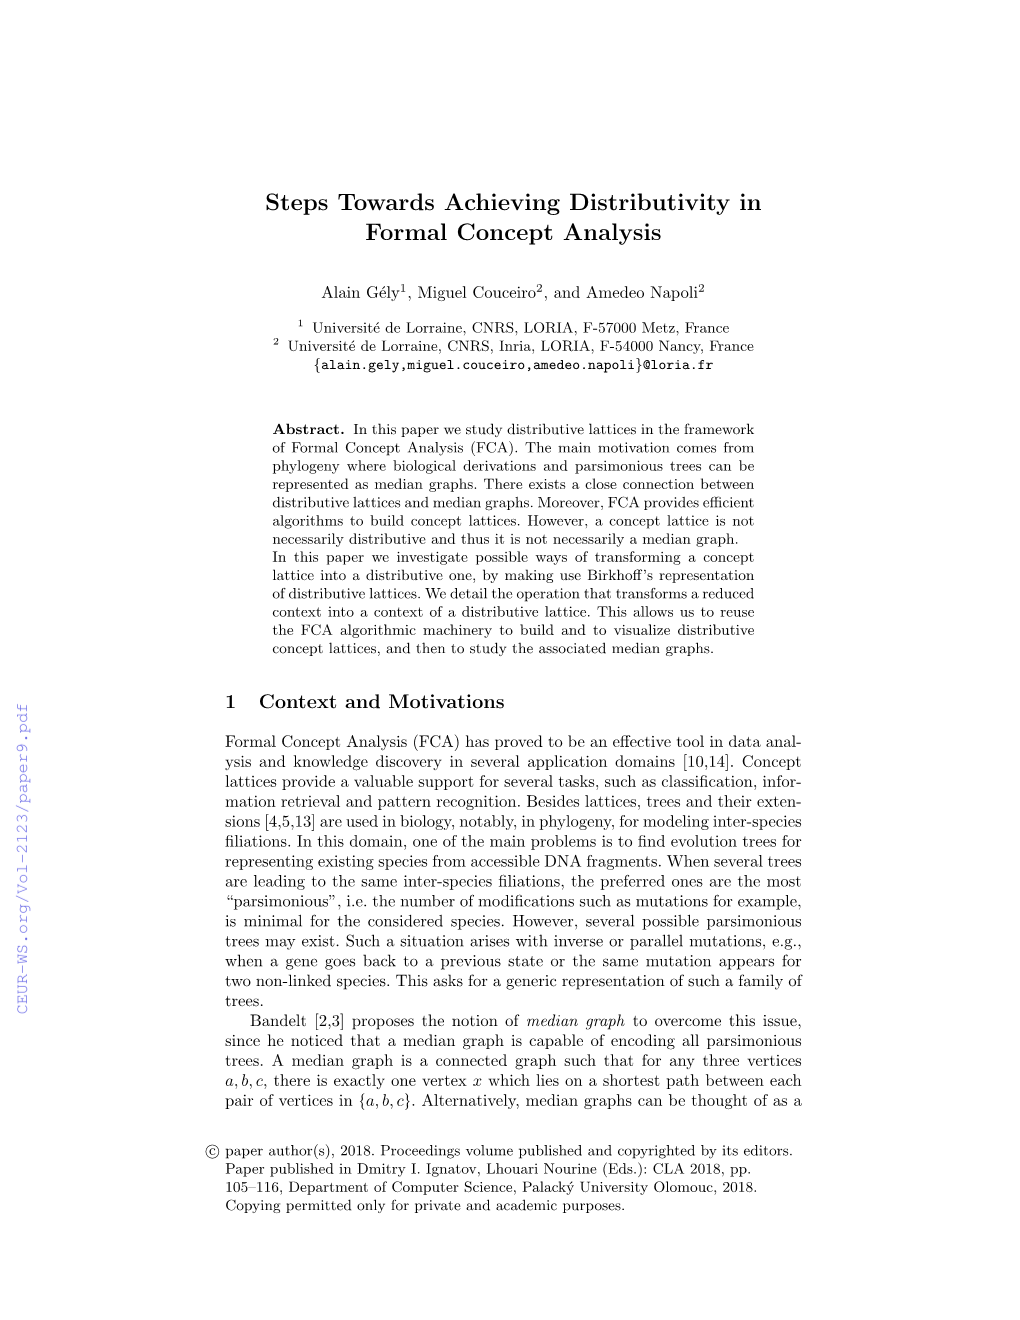 Steps Towards Achieving Distributivity in Formal Concept Analysis